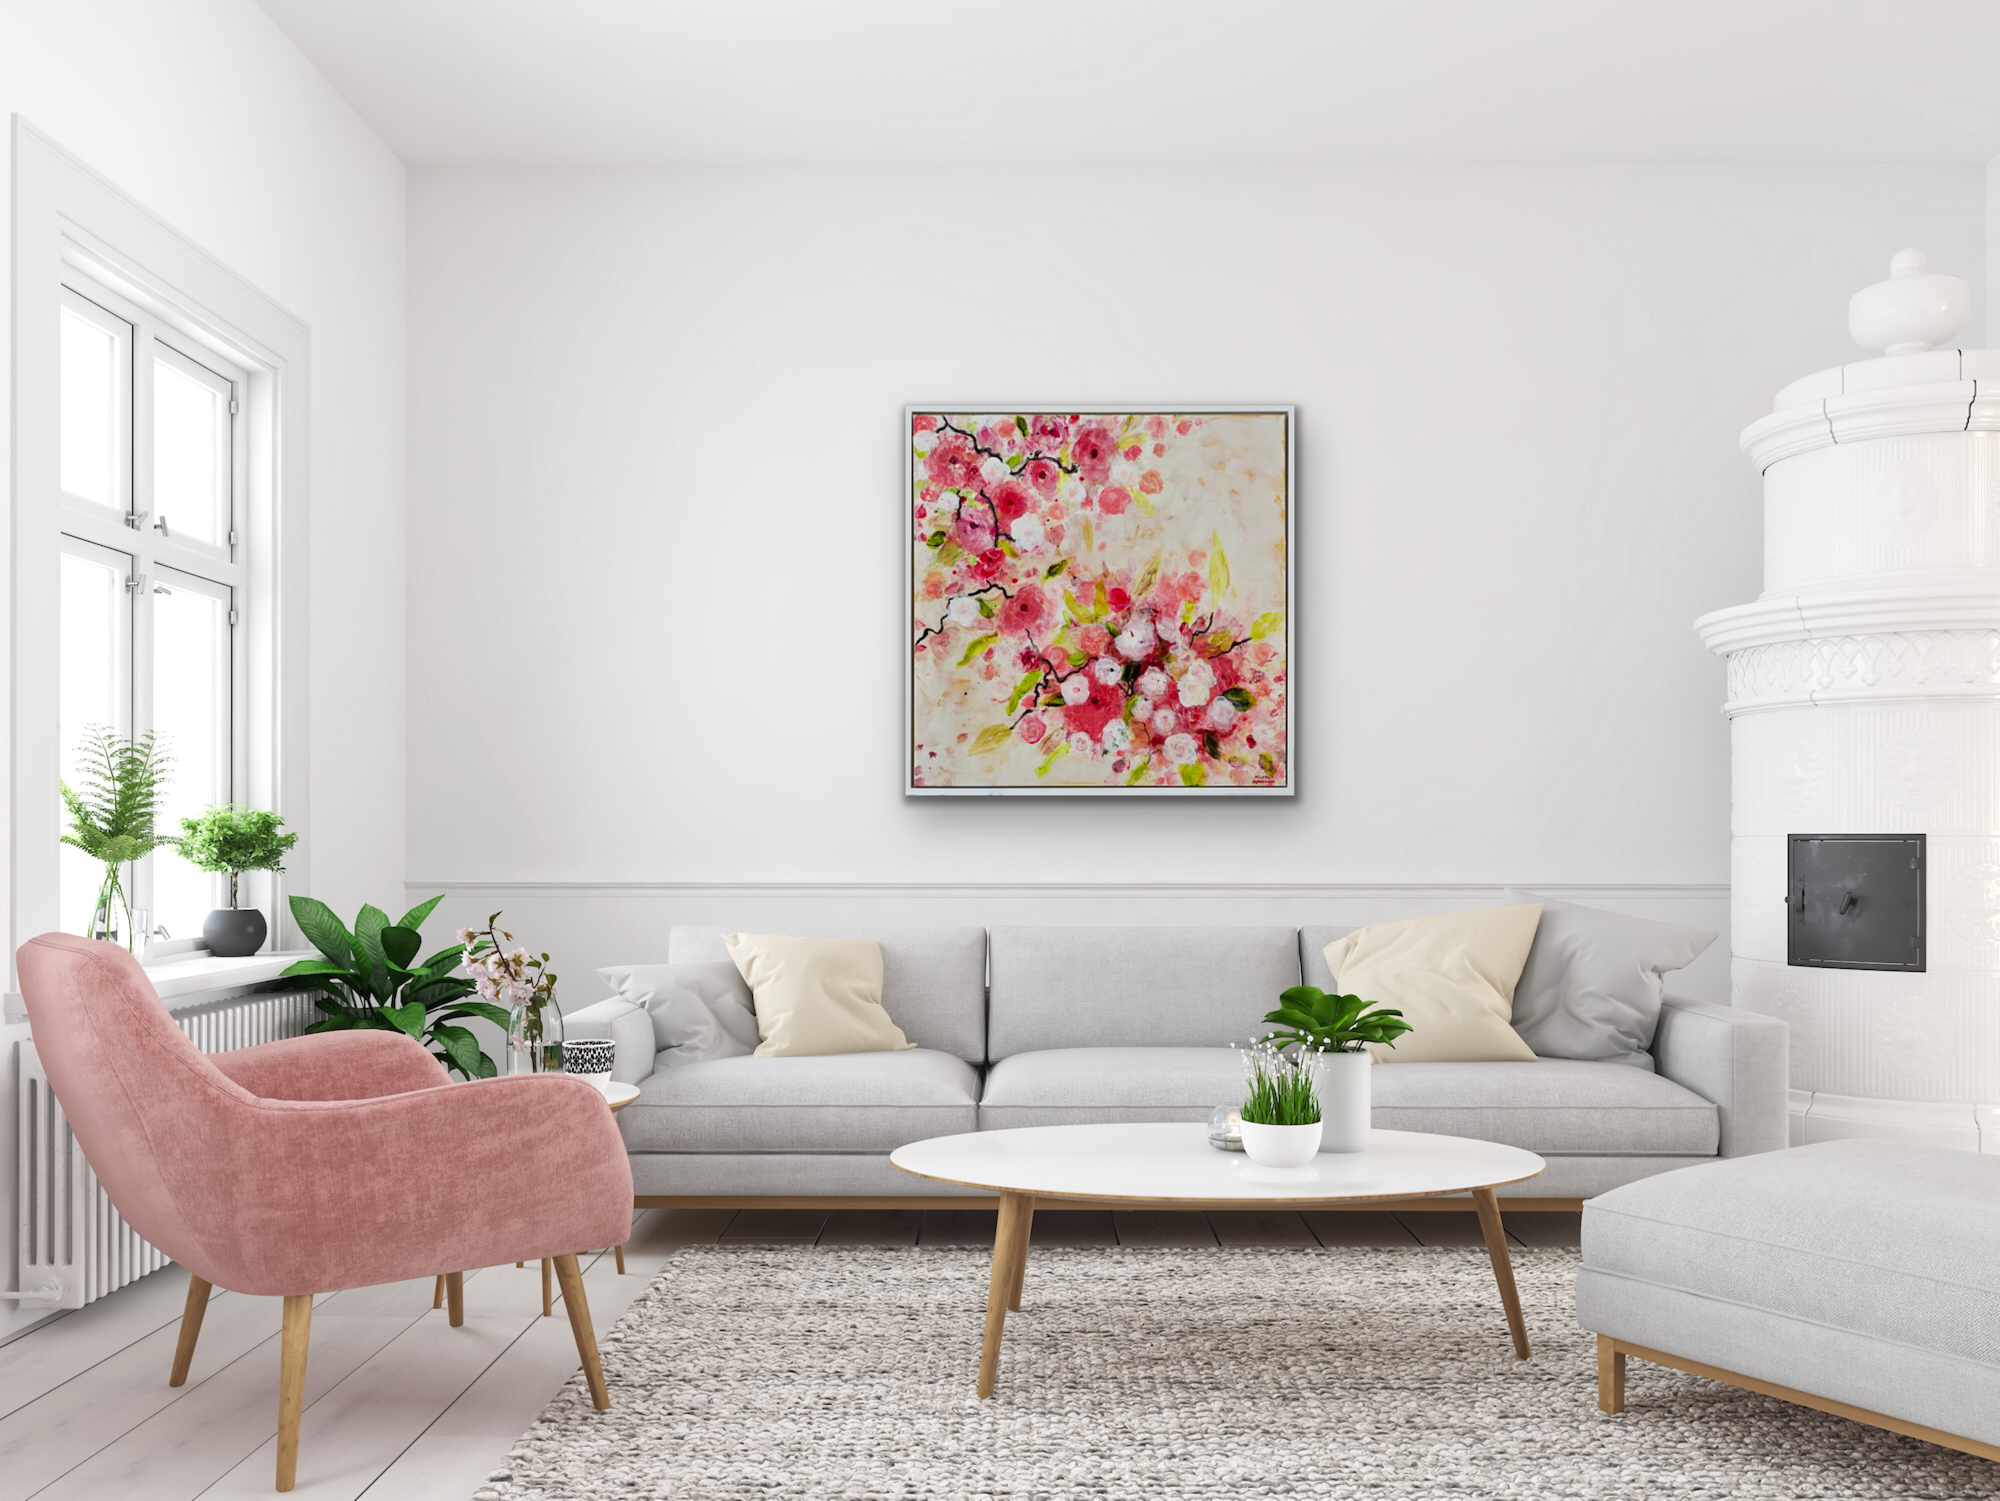 Fresh and joyful, this original painting with its red, coral and bright white abstract flowers against a warm white background displayed in a living room setting.